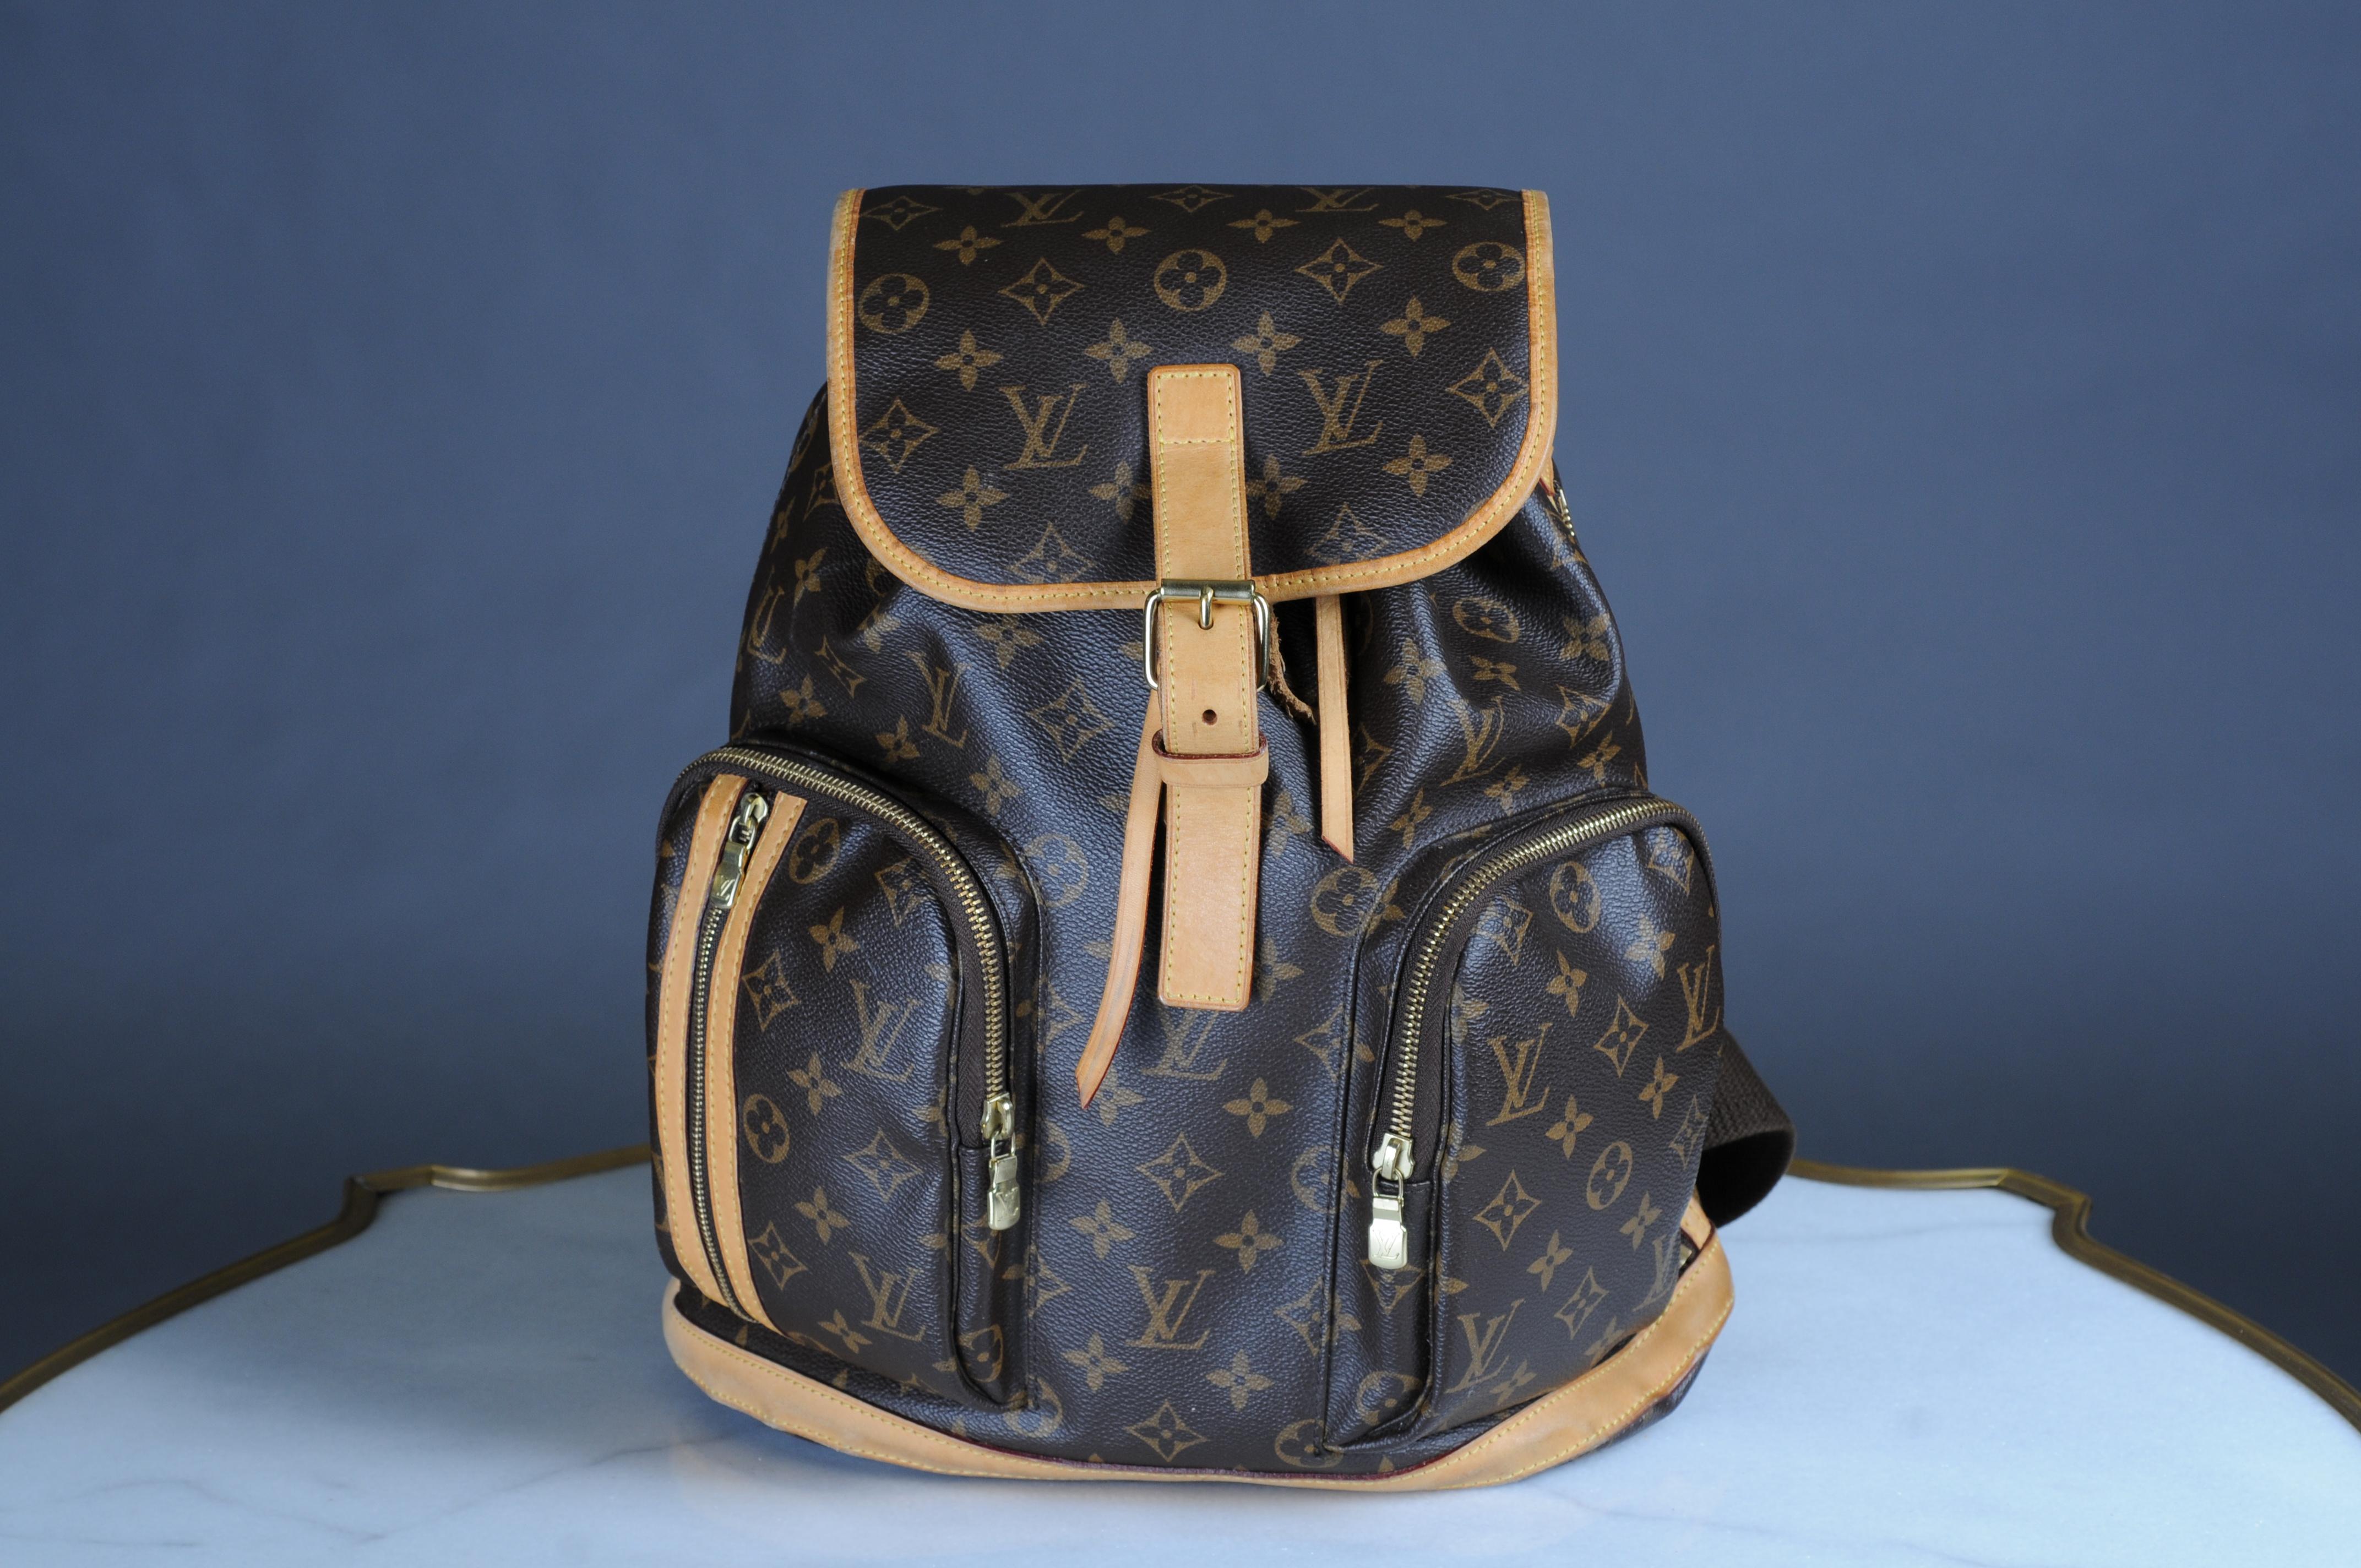 Material/Color: Canvas Monogram;
Dimensions: 30 x 36 x 13 cm (width x height x depth);
Golden accessories;
Two front zip pockets;
Front flap;
buckle closure;
drawstring closure;
Adjustable rope stays;
One side vertical pocket with zipper;
Padlock